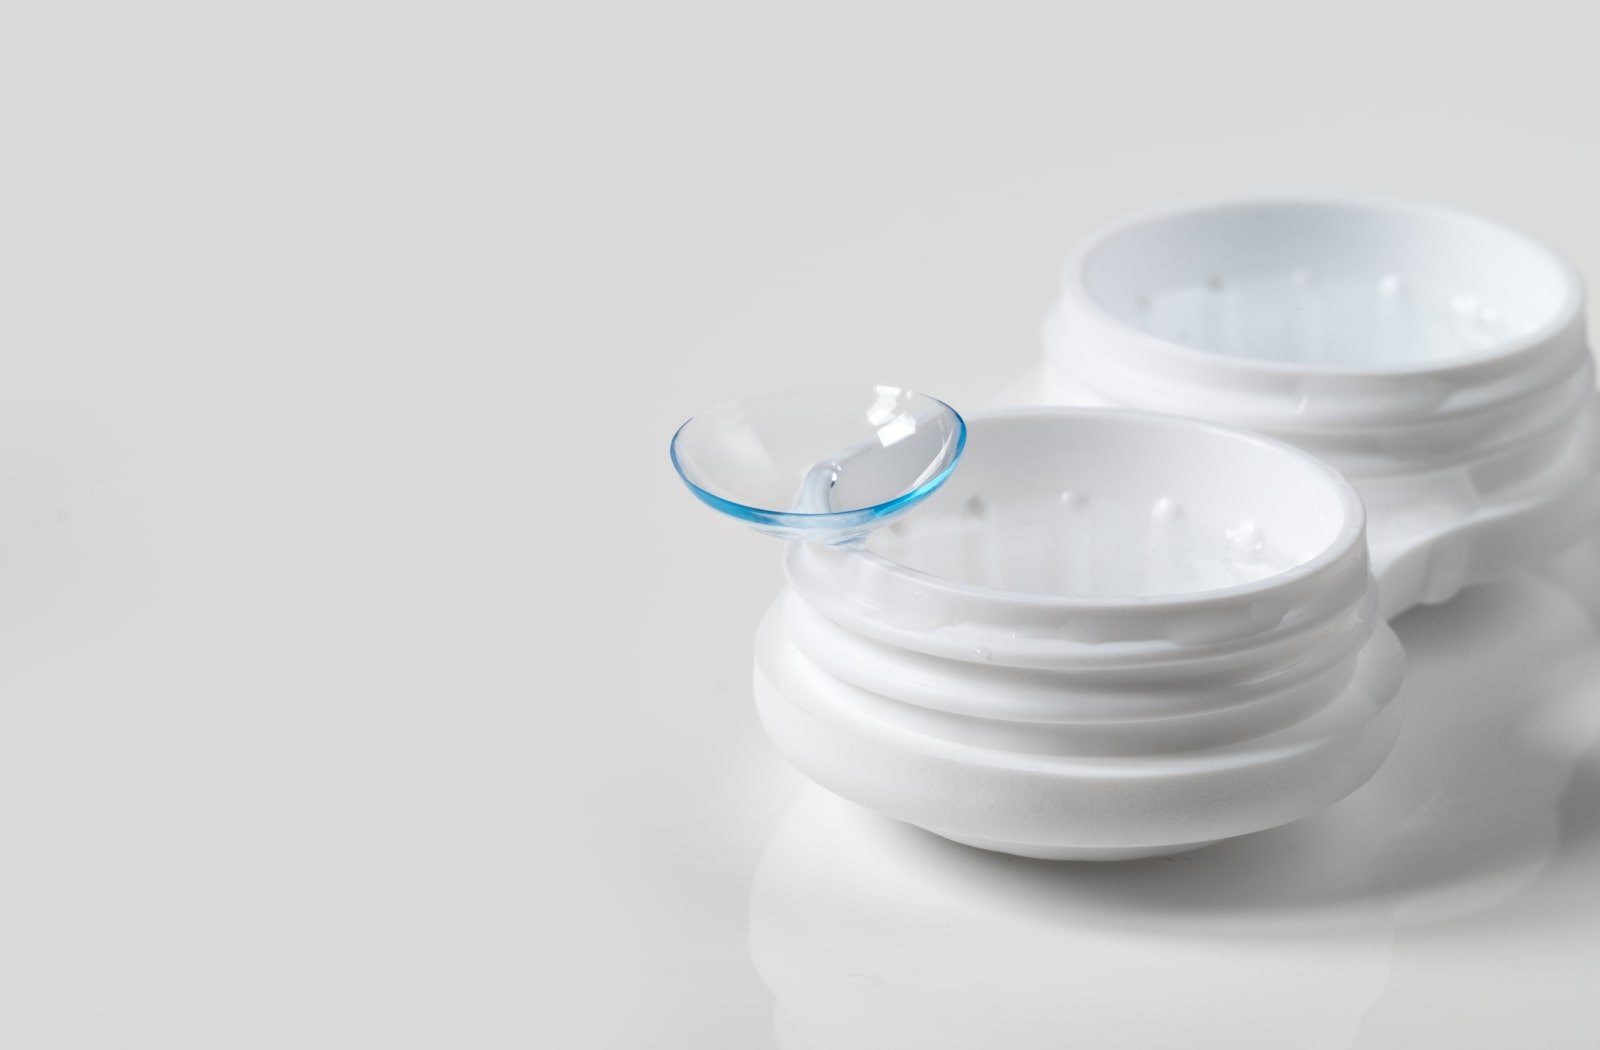 A contact lens sitting on a contact lens case